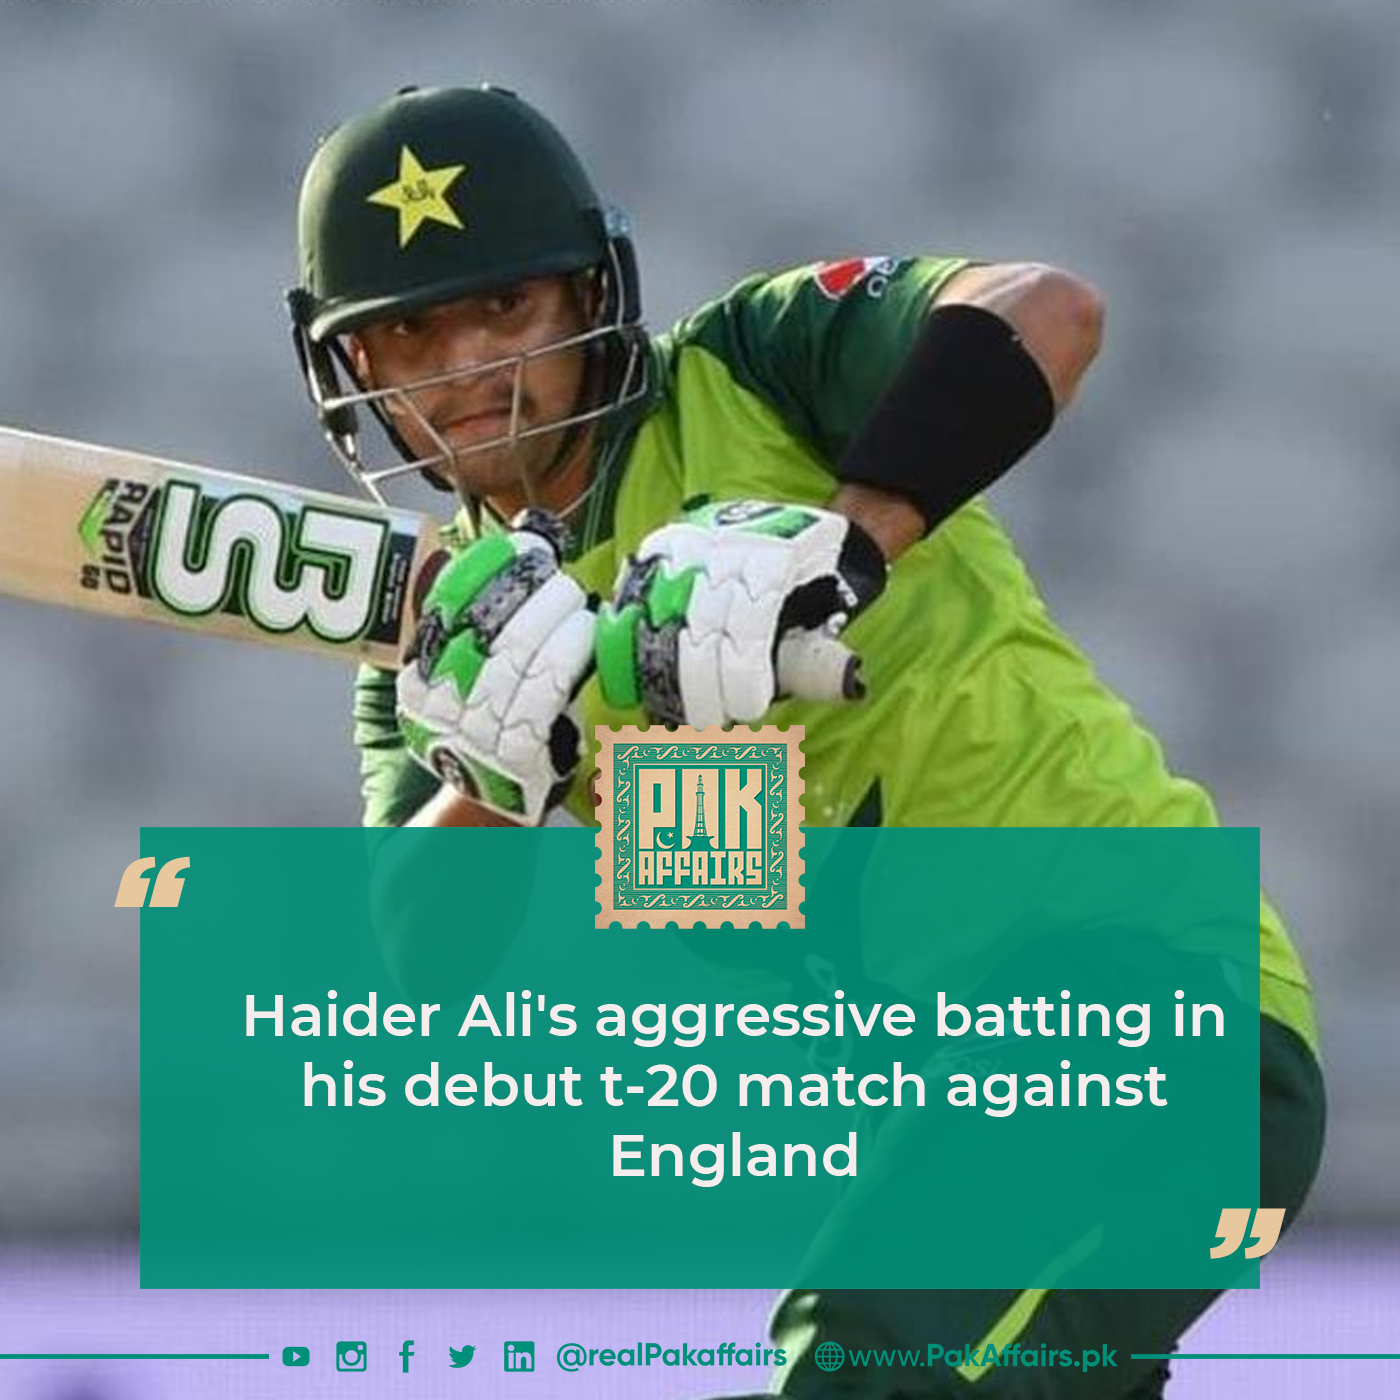 Haider Ali's aggressive batting in his debut t-20 match against England